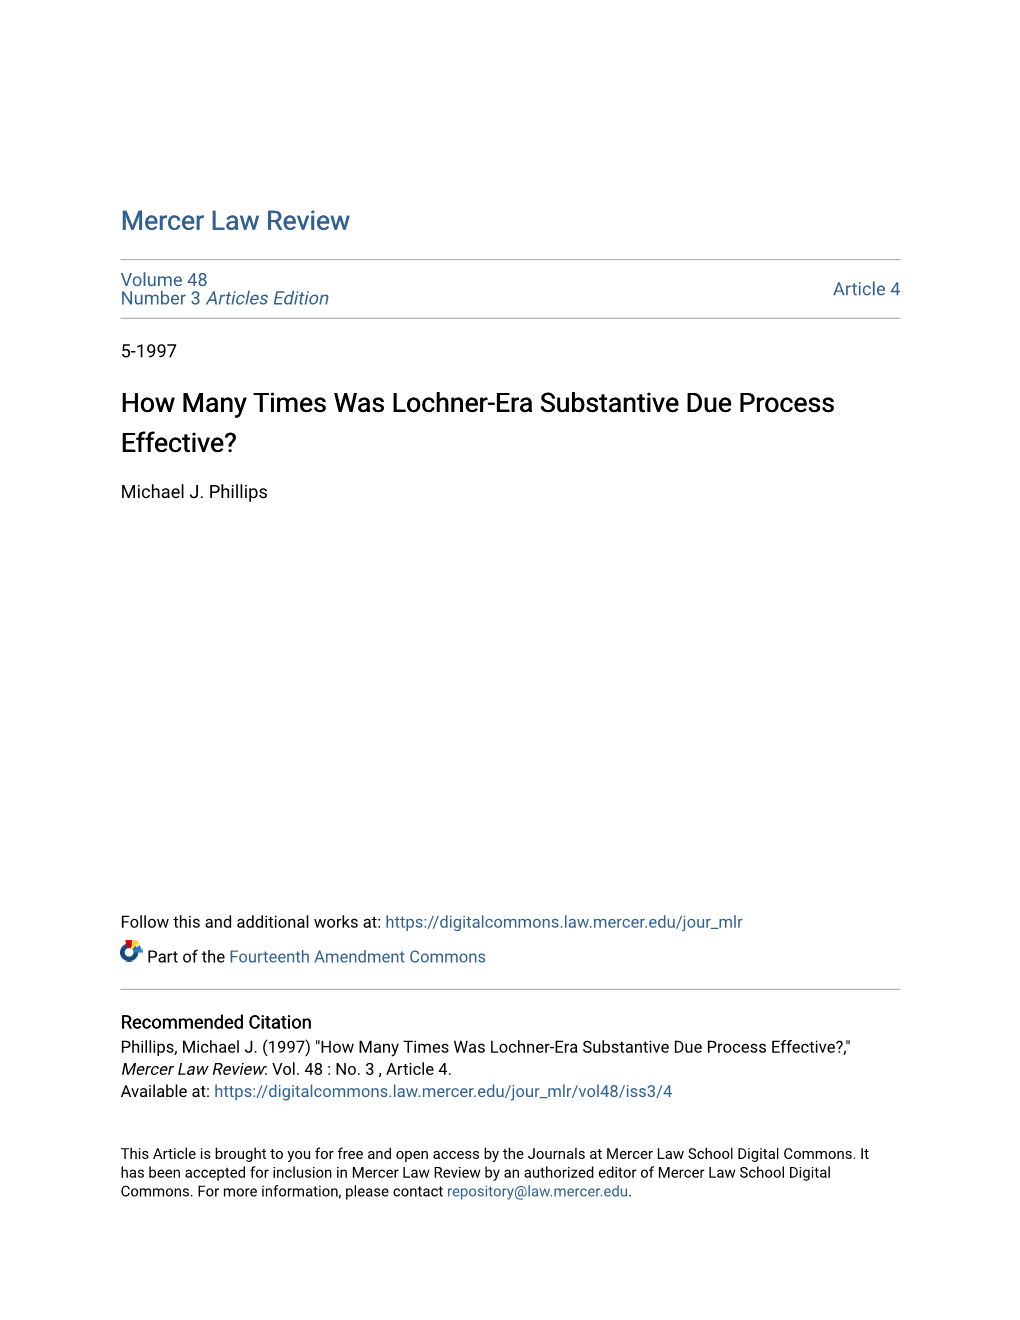 How Many Times Was Lochner-Era Substantive Due Process Effective?